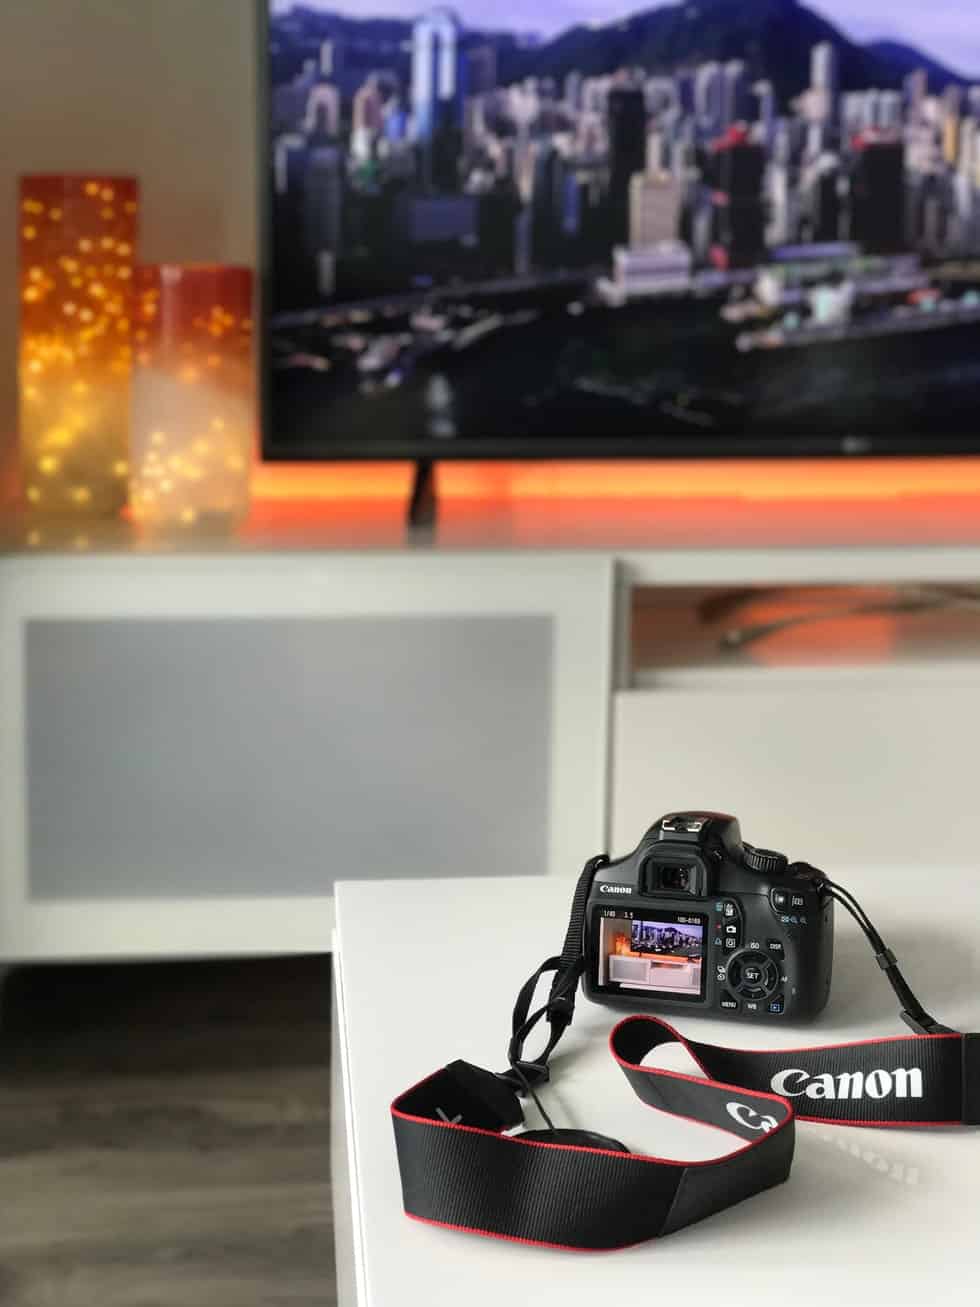 camera on desk in front of tv